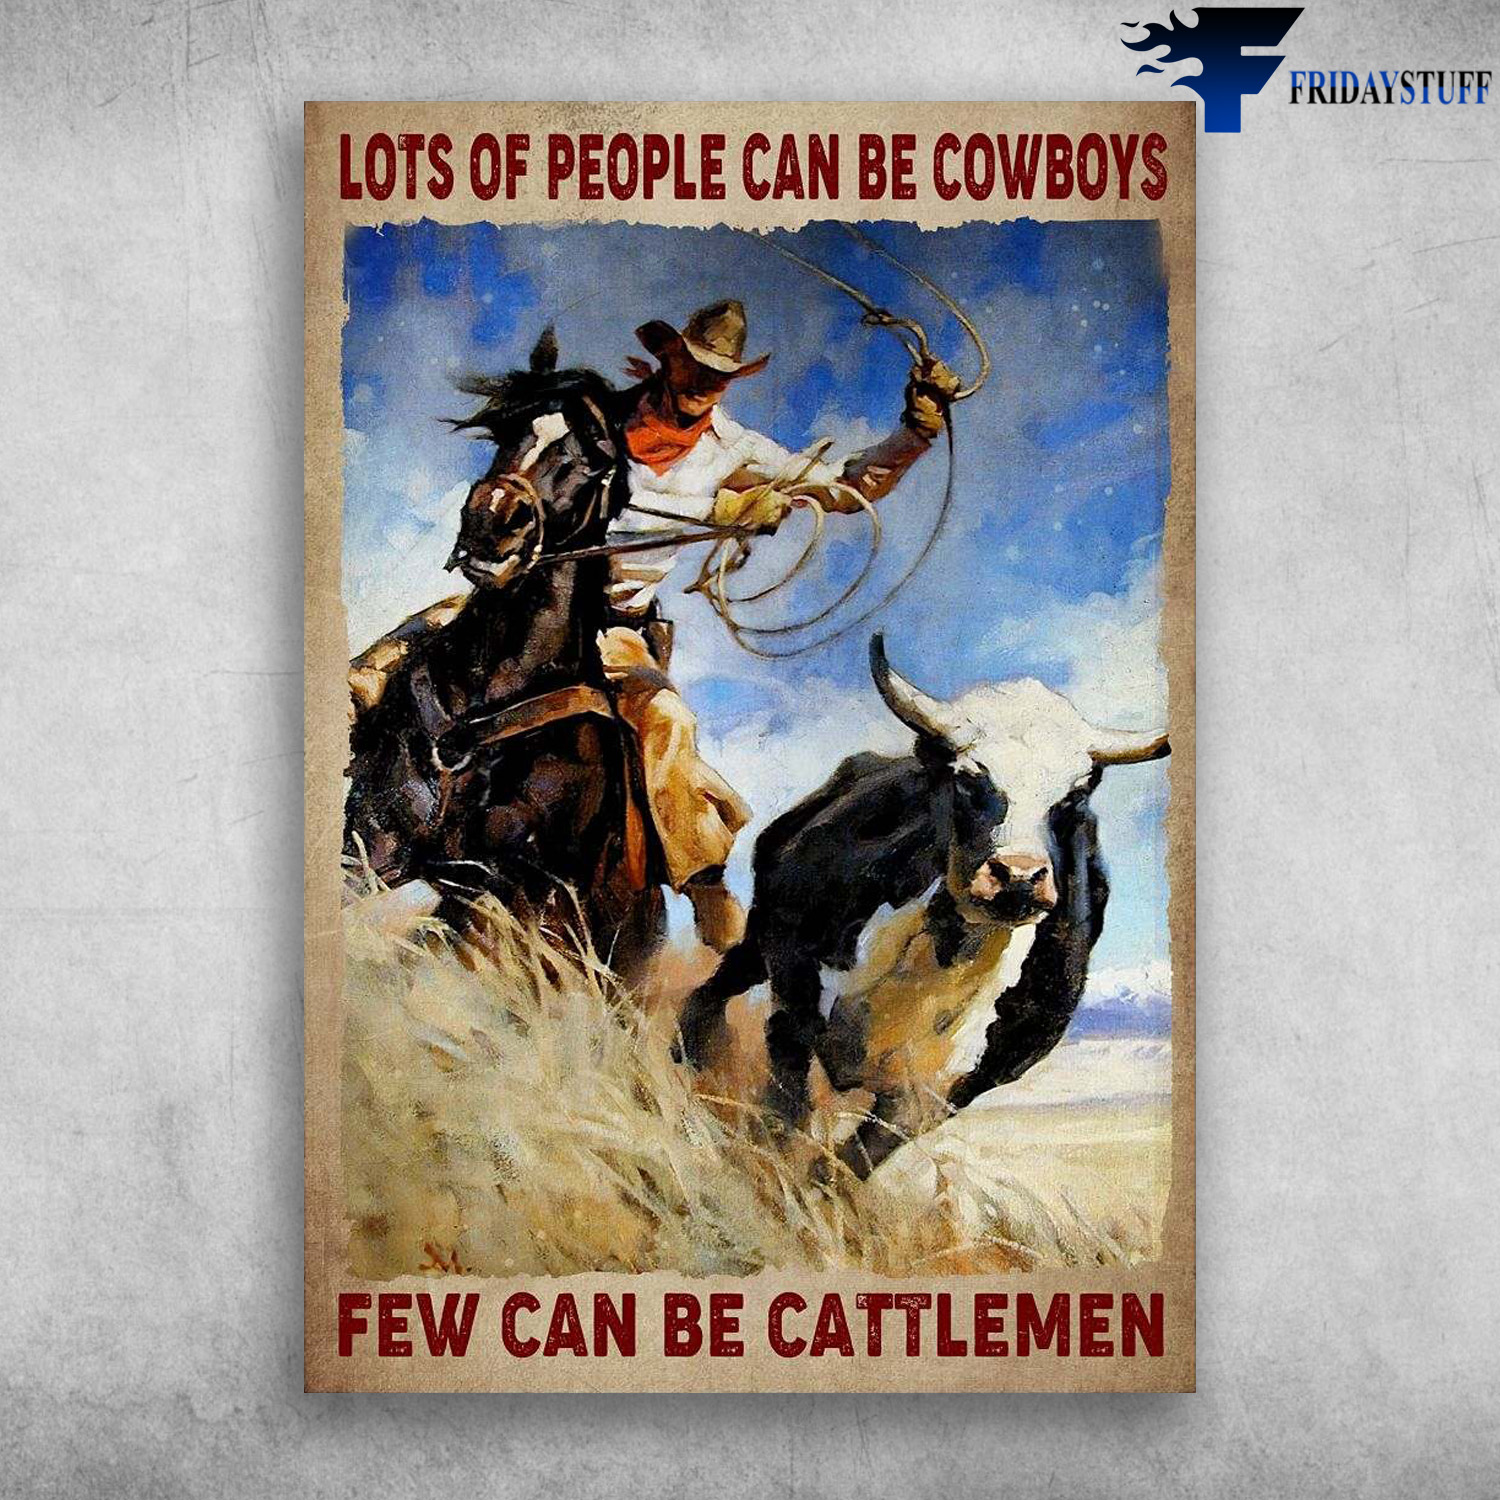 Cowboy Riding, Dairy Cow - Lots Of People Canbe Cowboys, Few Can Be Cattlemen